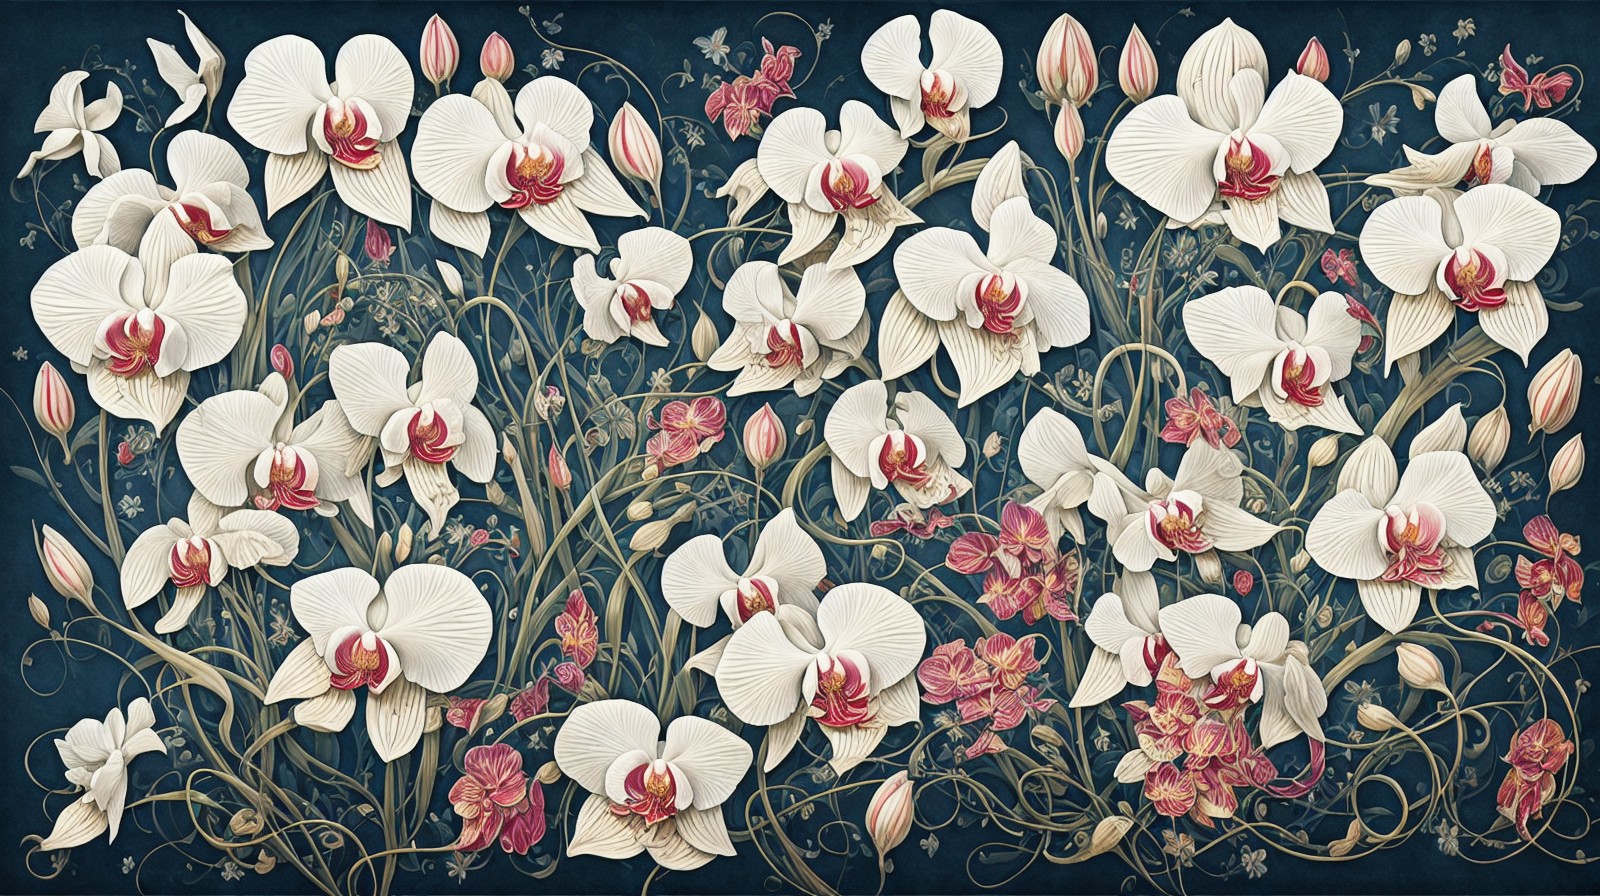 Surreal decorative painting filled with various flowers